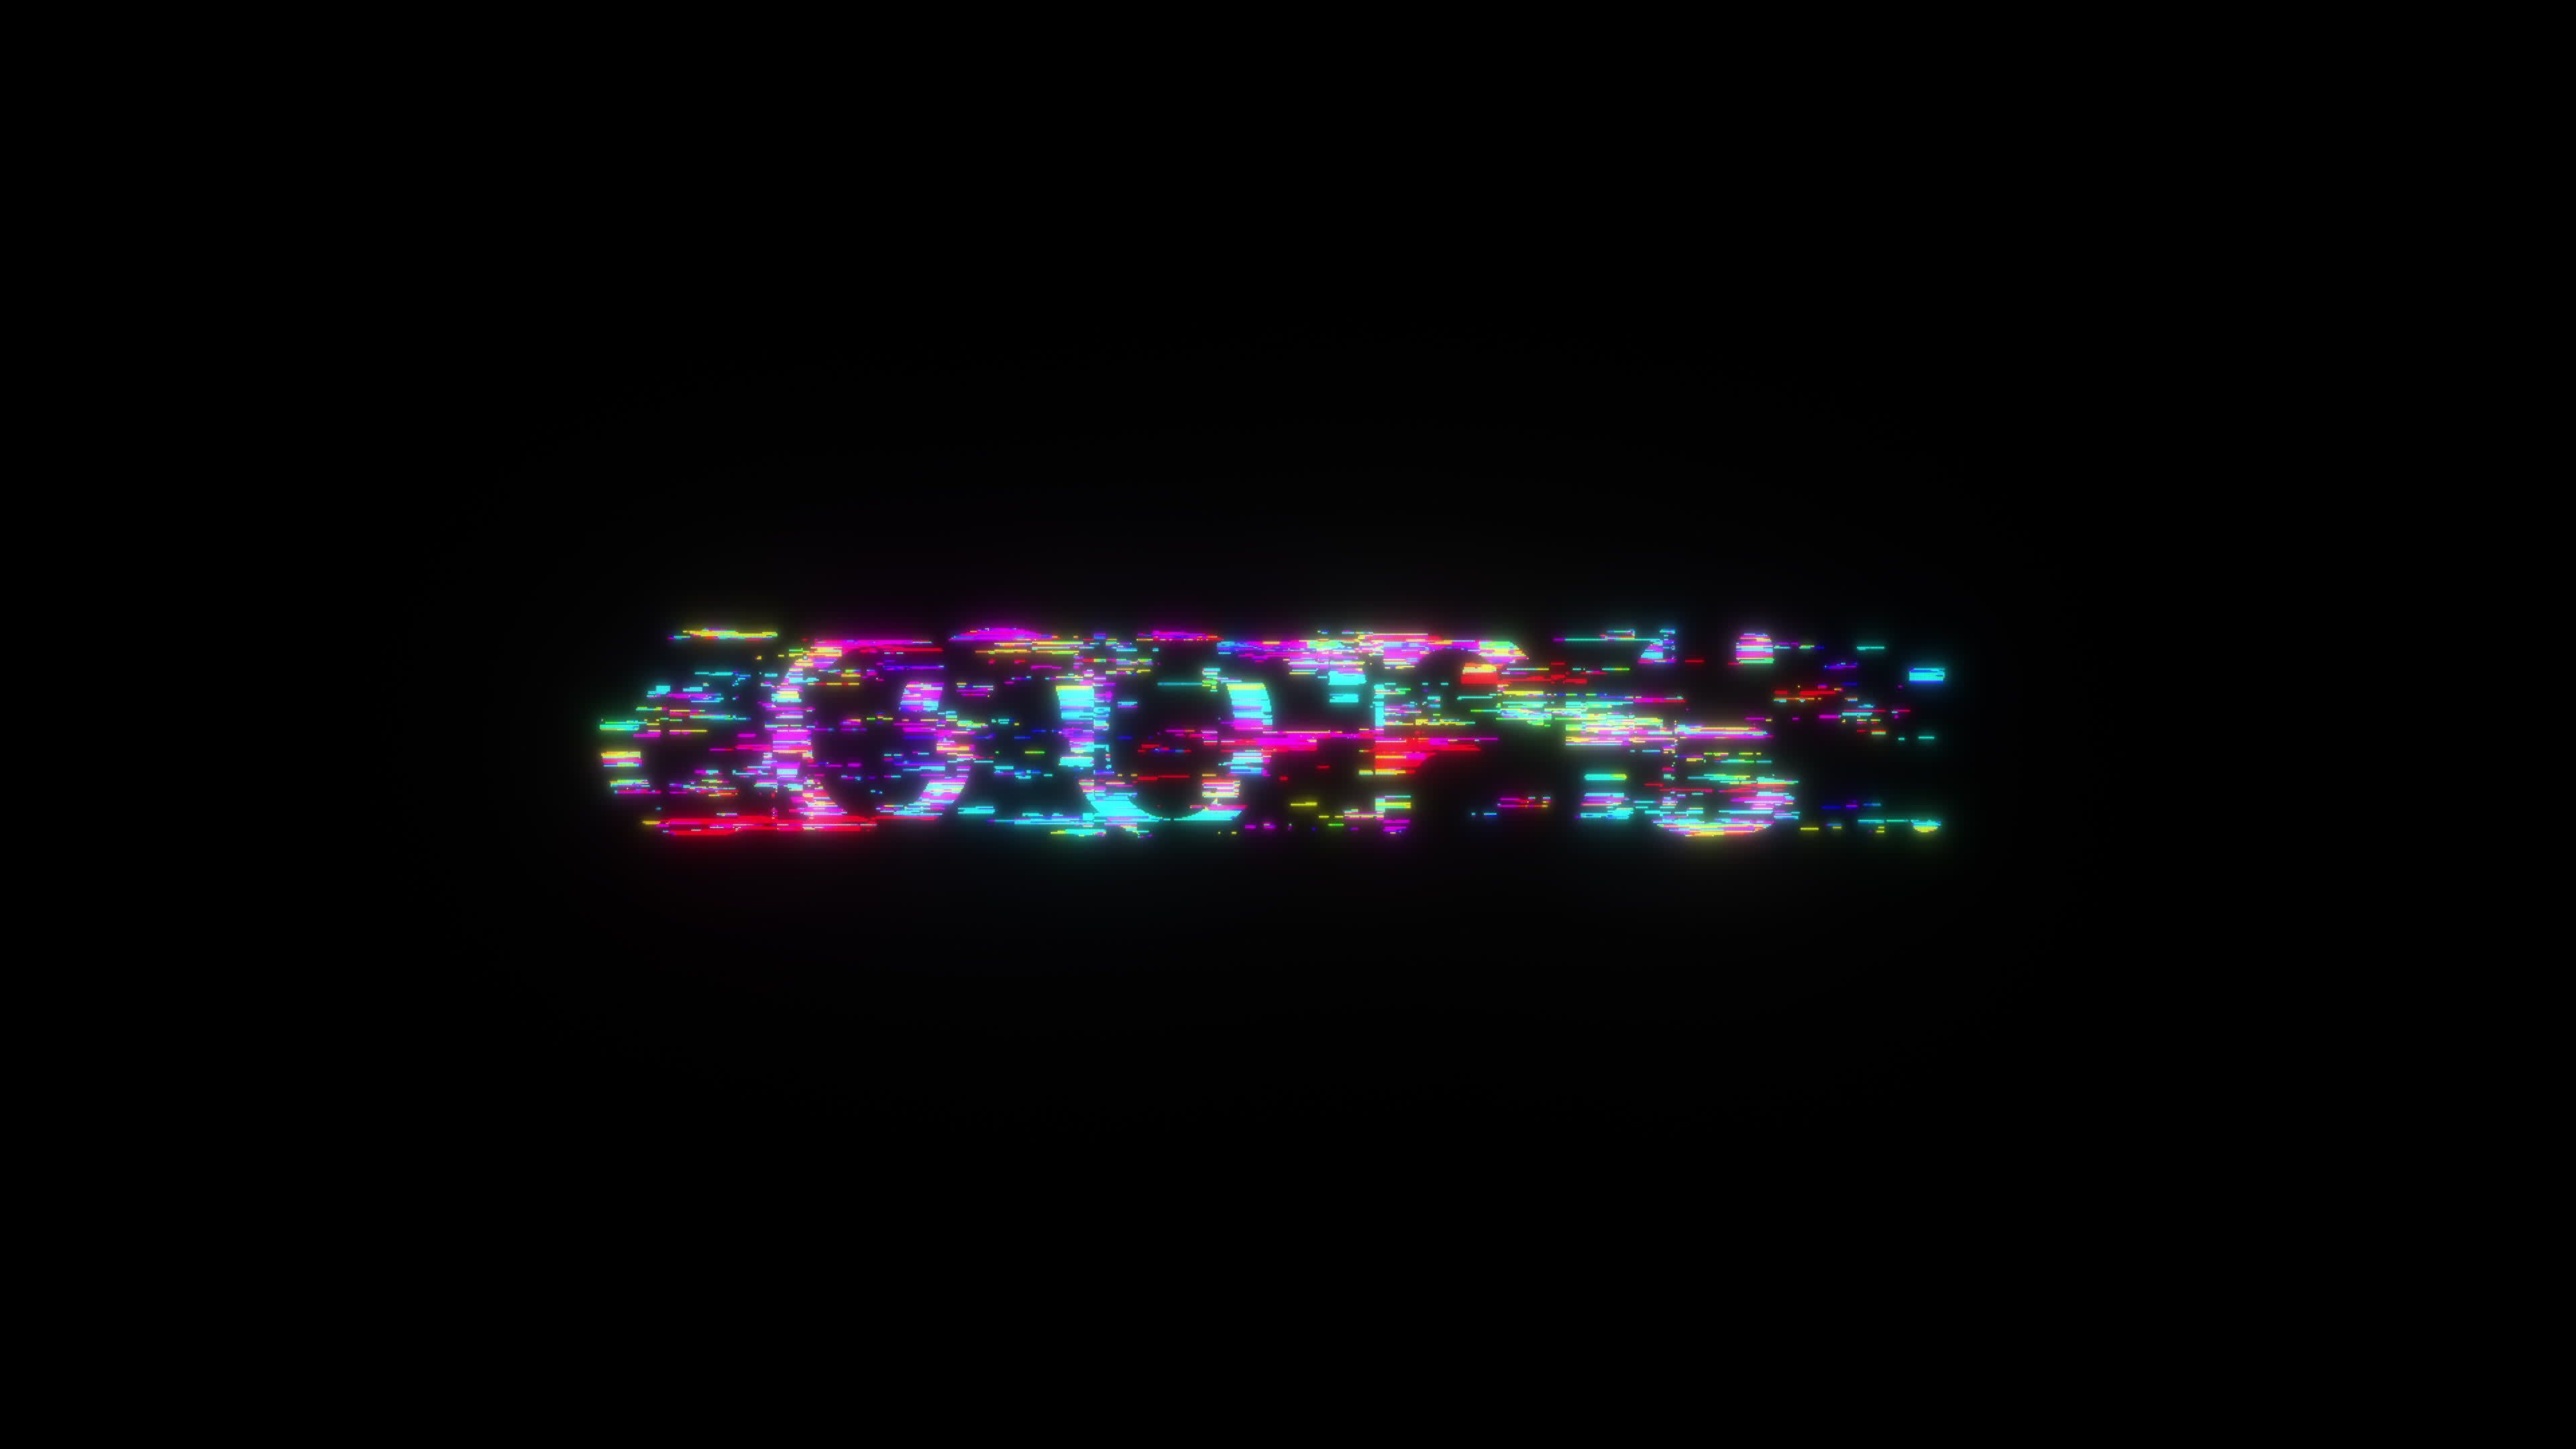 A black background with colorful lights - 3D